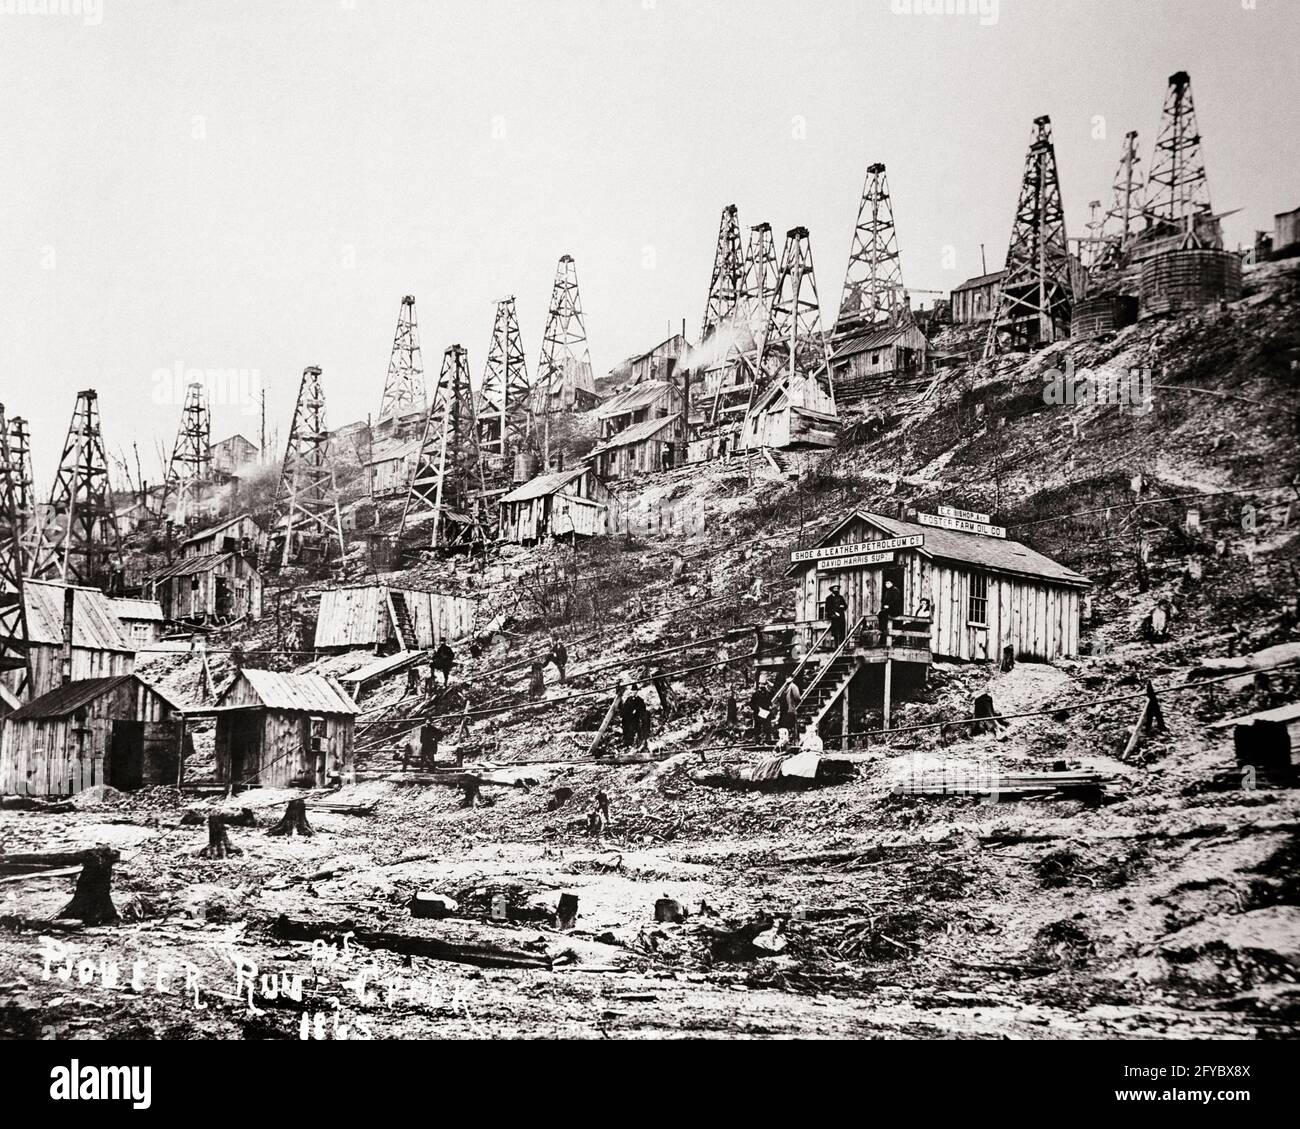 1850s PIONEER RUN CREEK OIL FIELD FIRST OIL WELL DRILLED 1865 AUGUST 27 1859 LANDSCAPE CHANGED OVERNIGHT TITUSVILLE PA USA - h7334 LAN001 HARS BLACK AND WHITE DERRICKS FOSSIL FUEL OLD FASHIONED PROFUSION Stock Photo